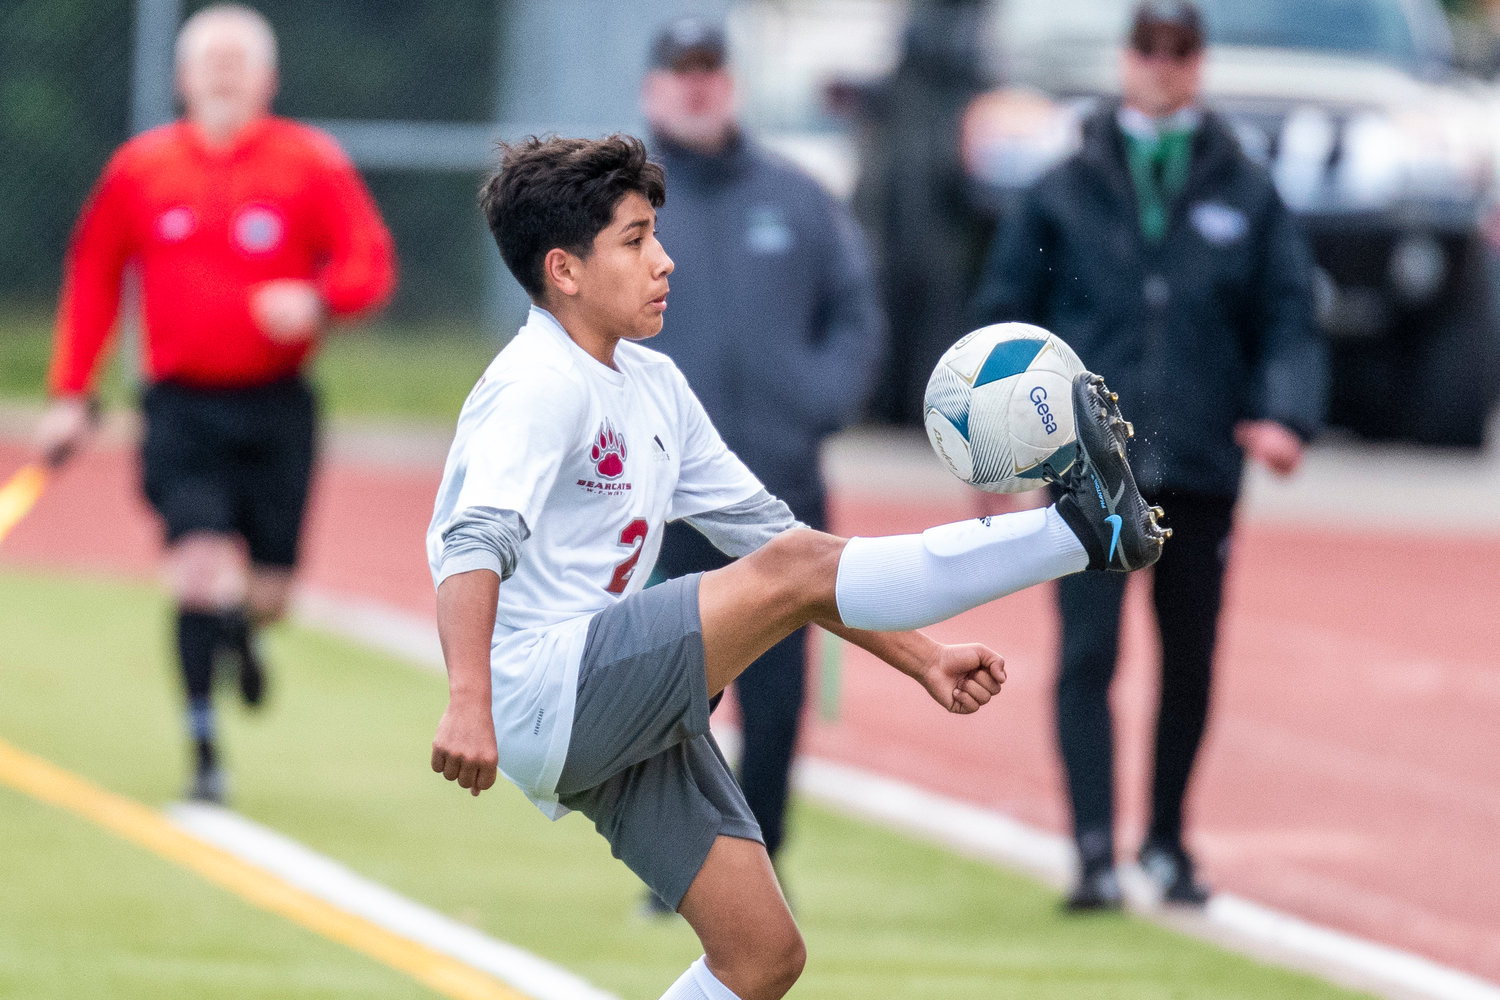 W.F. West's Adrian Jaimes gains possession against Tumwater during the district semifinals on May 12.